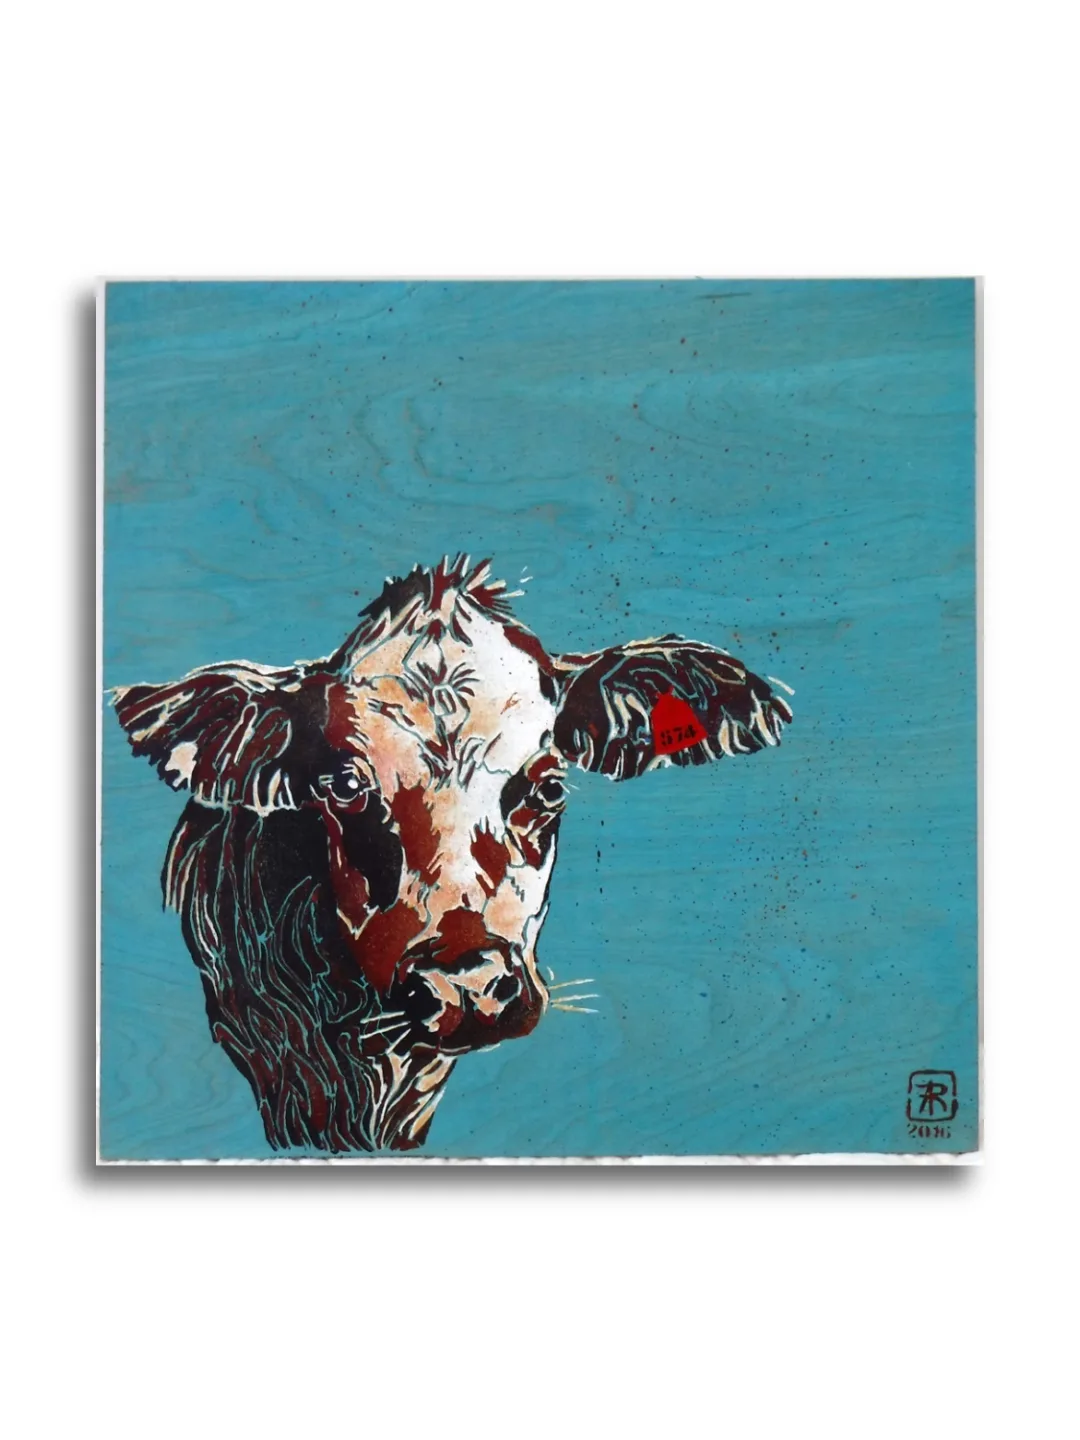 Cow #574 by Ann Richmond - A stunning, Original stencilled artwork featuring a Dairy Cow wearing a numbered ear-tag. Painted in the artist's unique style... Framing available.